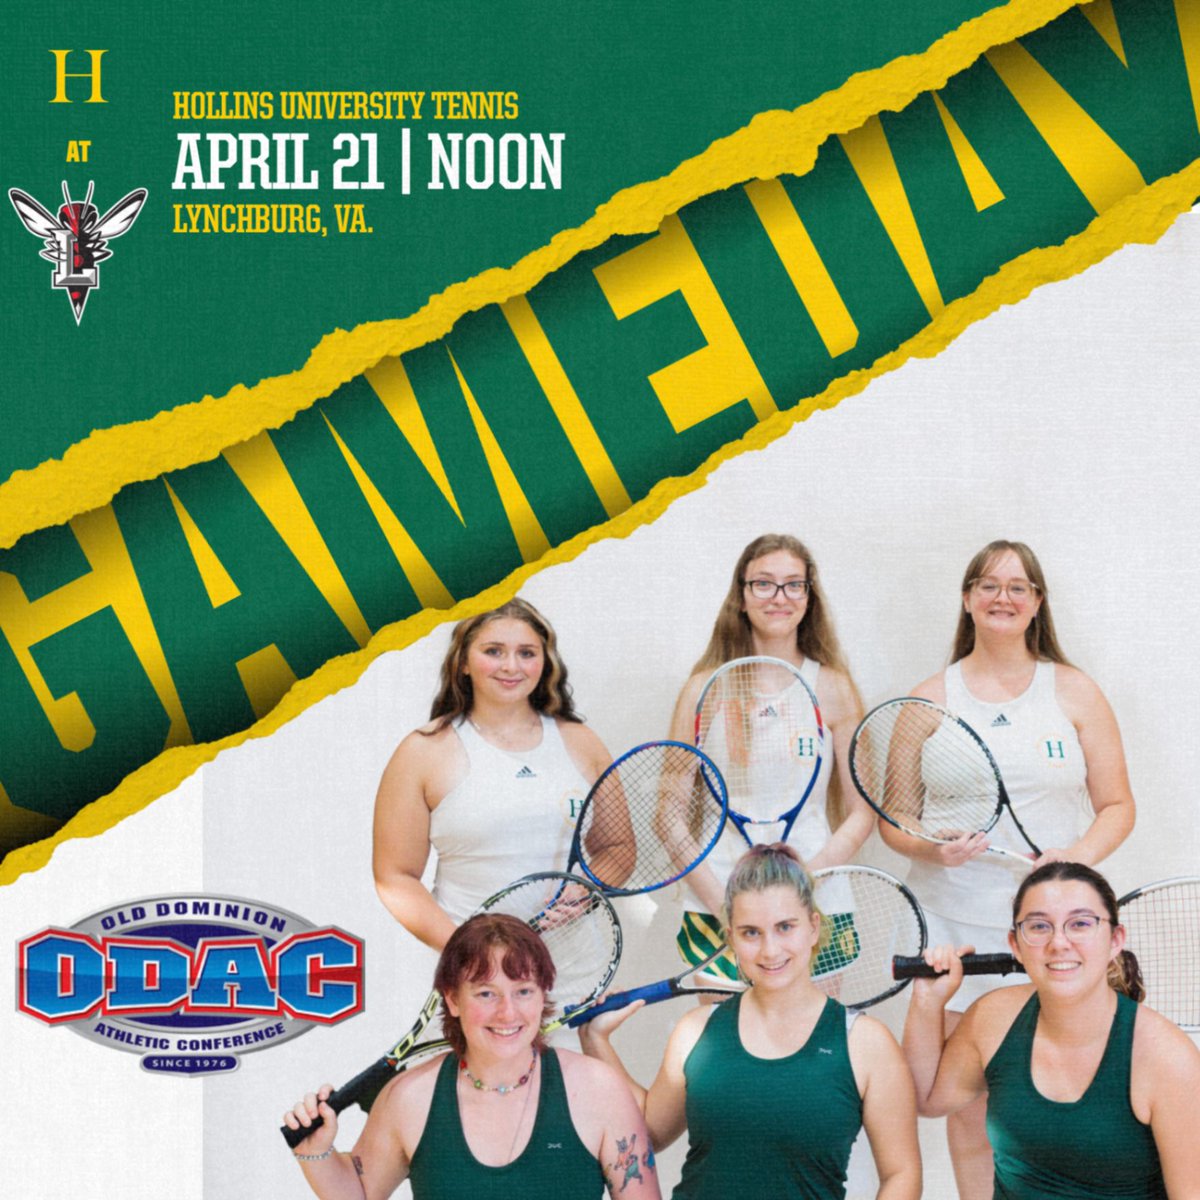 GAMEDAY for Hollins tennis this afternoon at University of Lynchburg, noon. #MyHollins